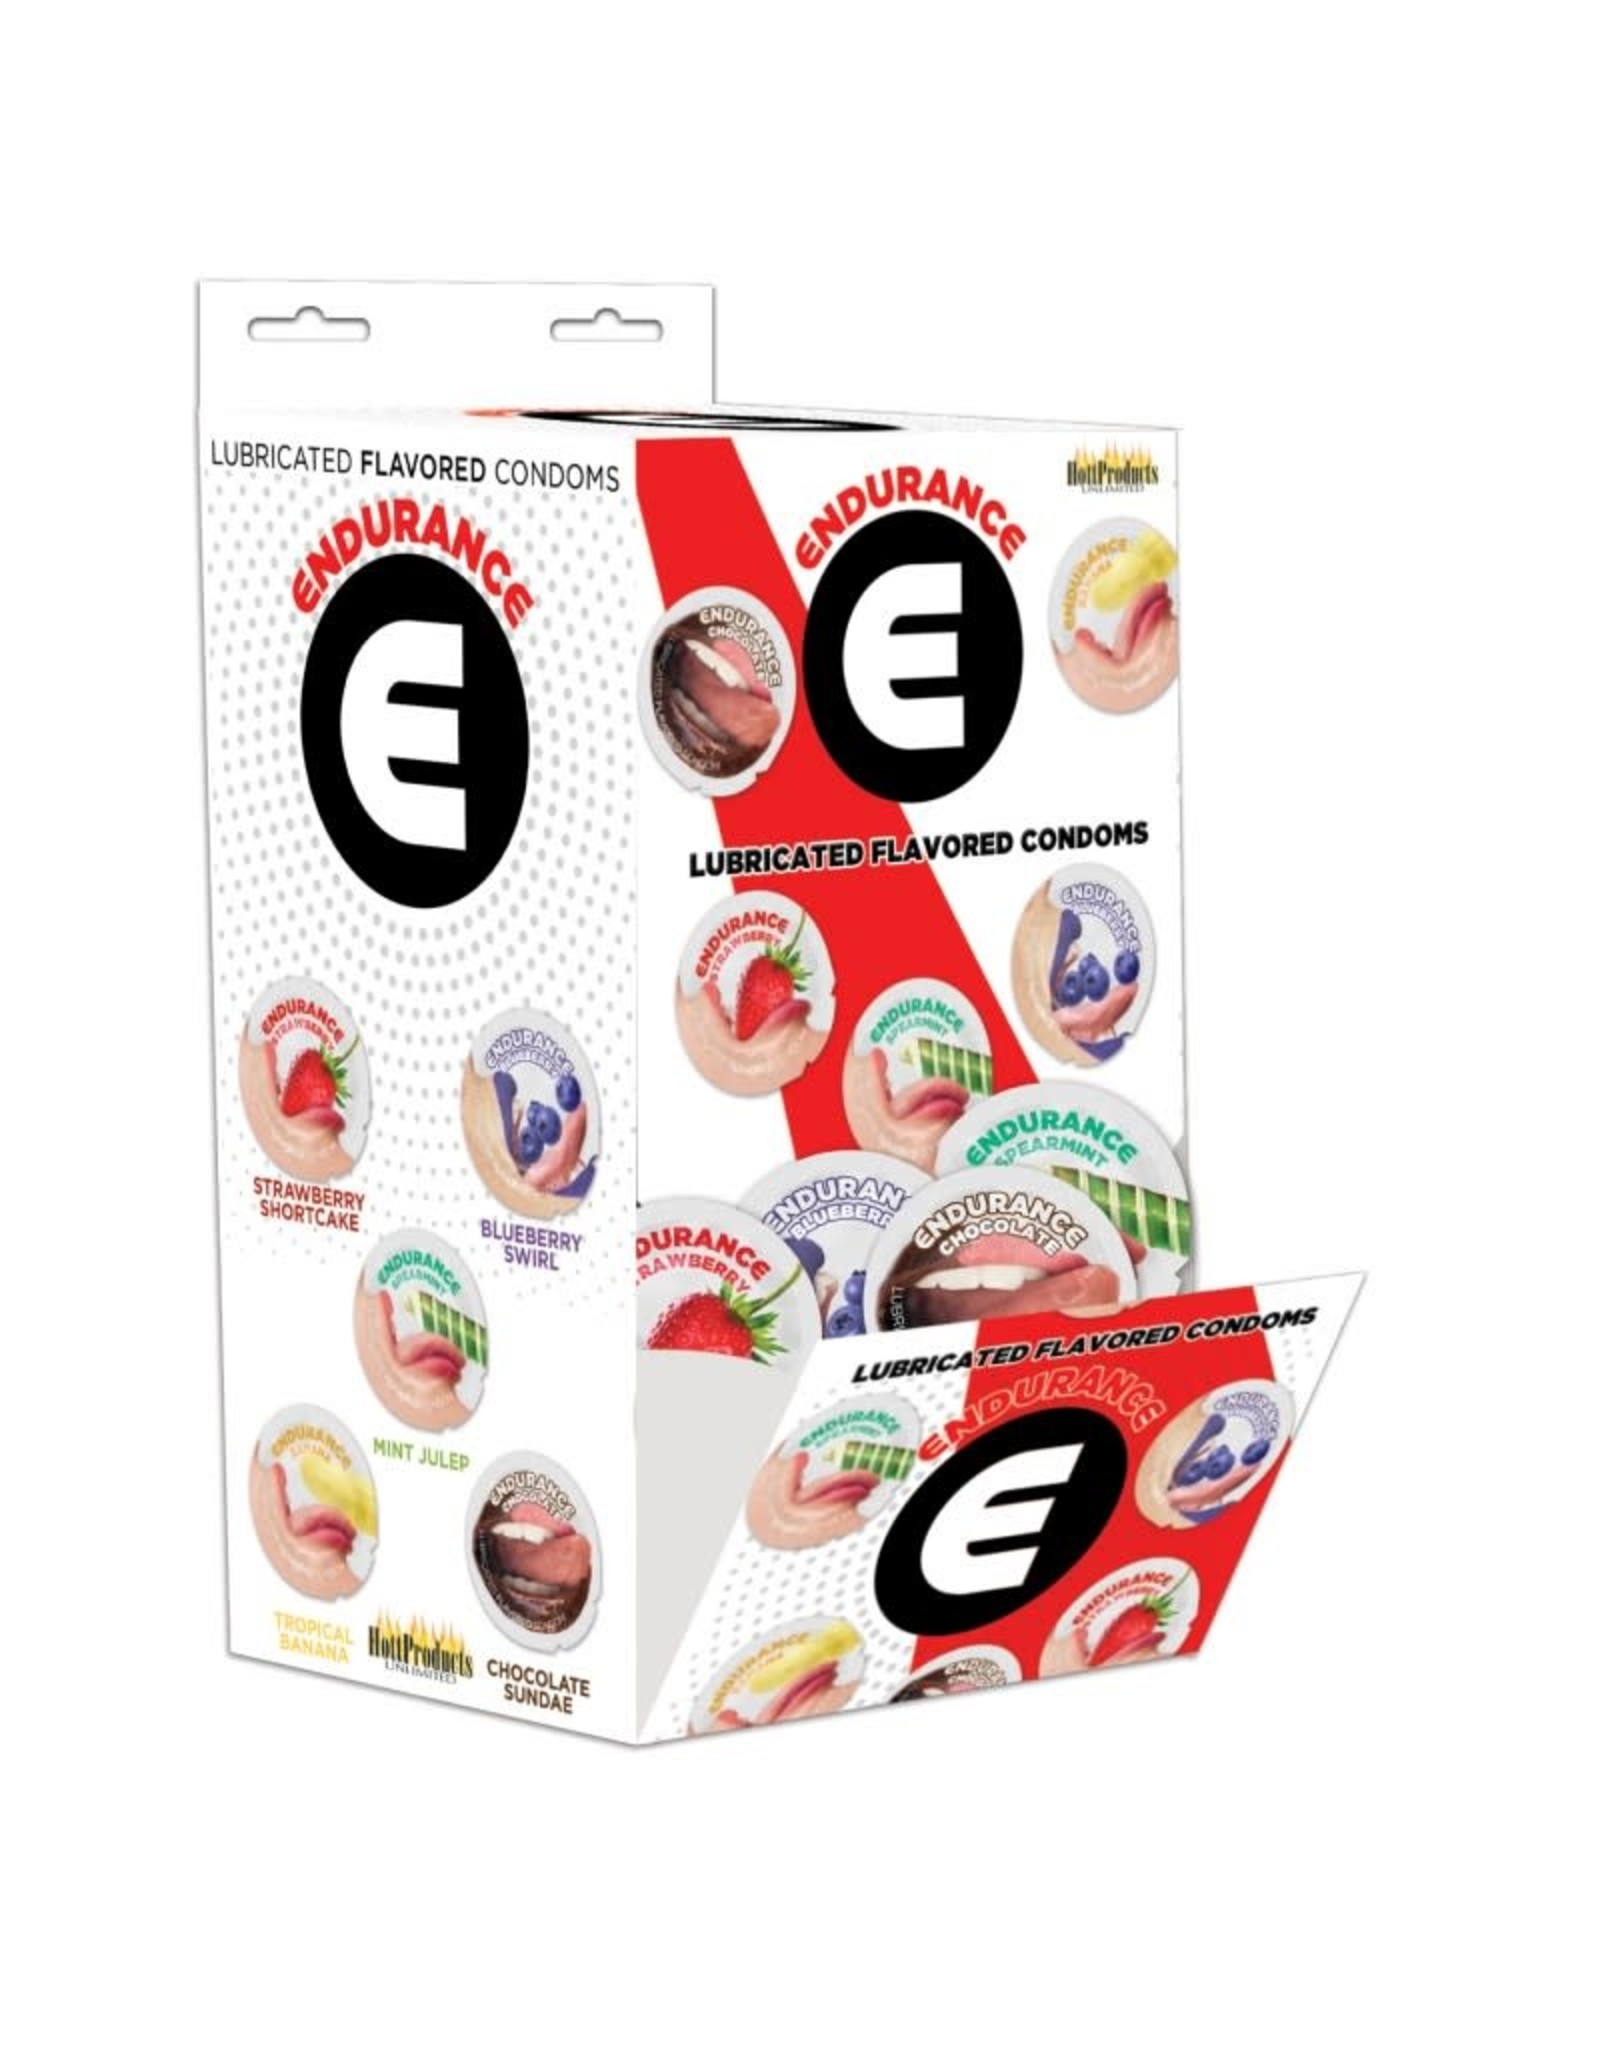 Hott Products Endurance Lubricated Flavored Condoms From Display Bown